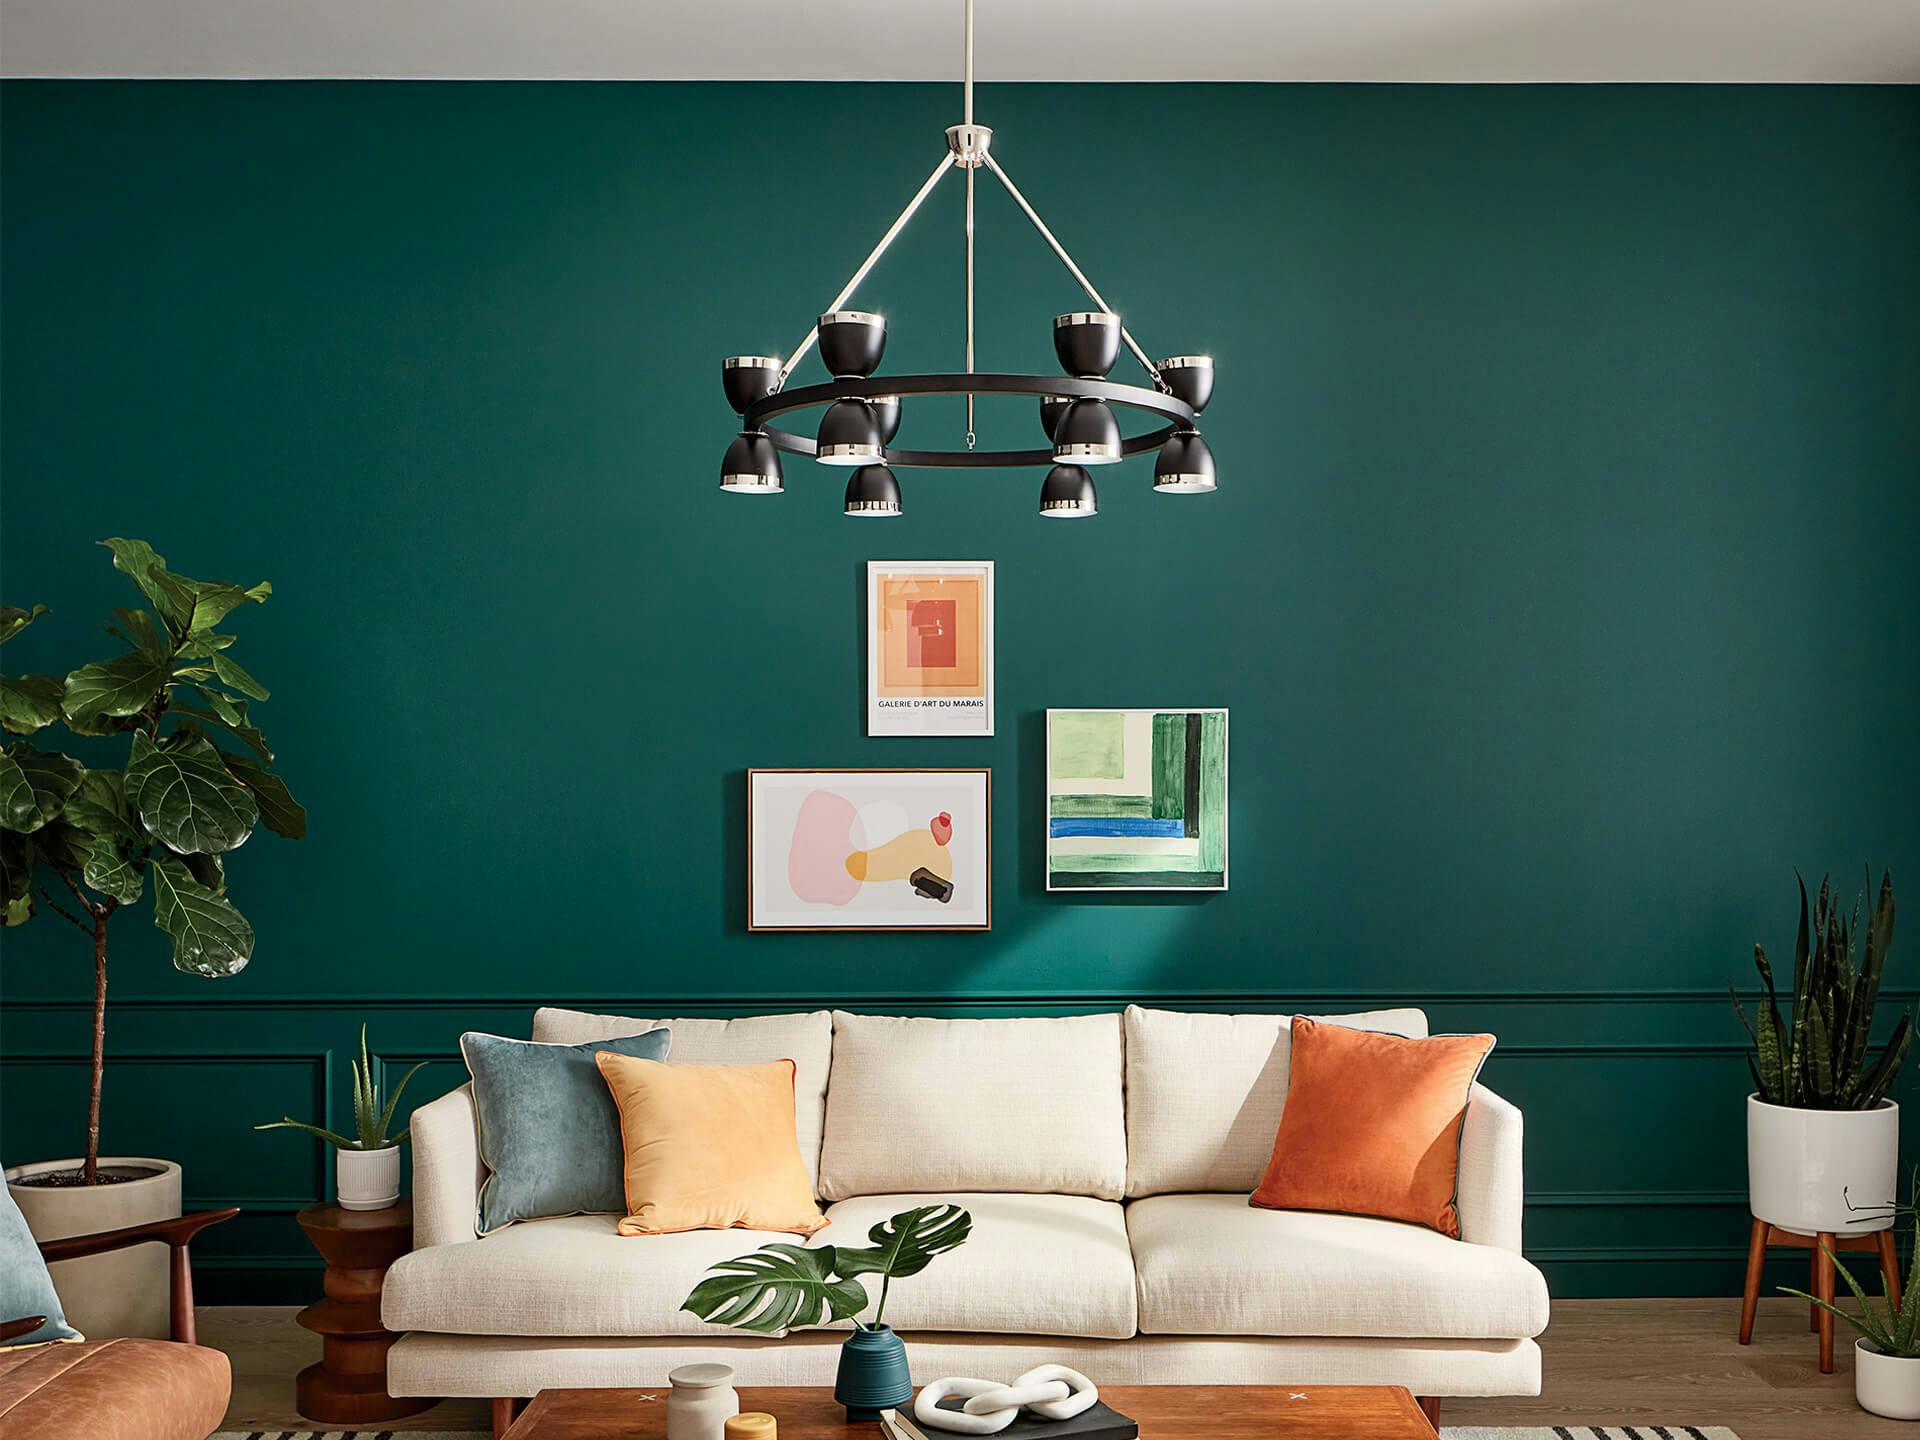 6 Light Baland chandelier in a living room turned on during the daytime